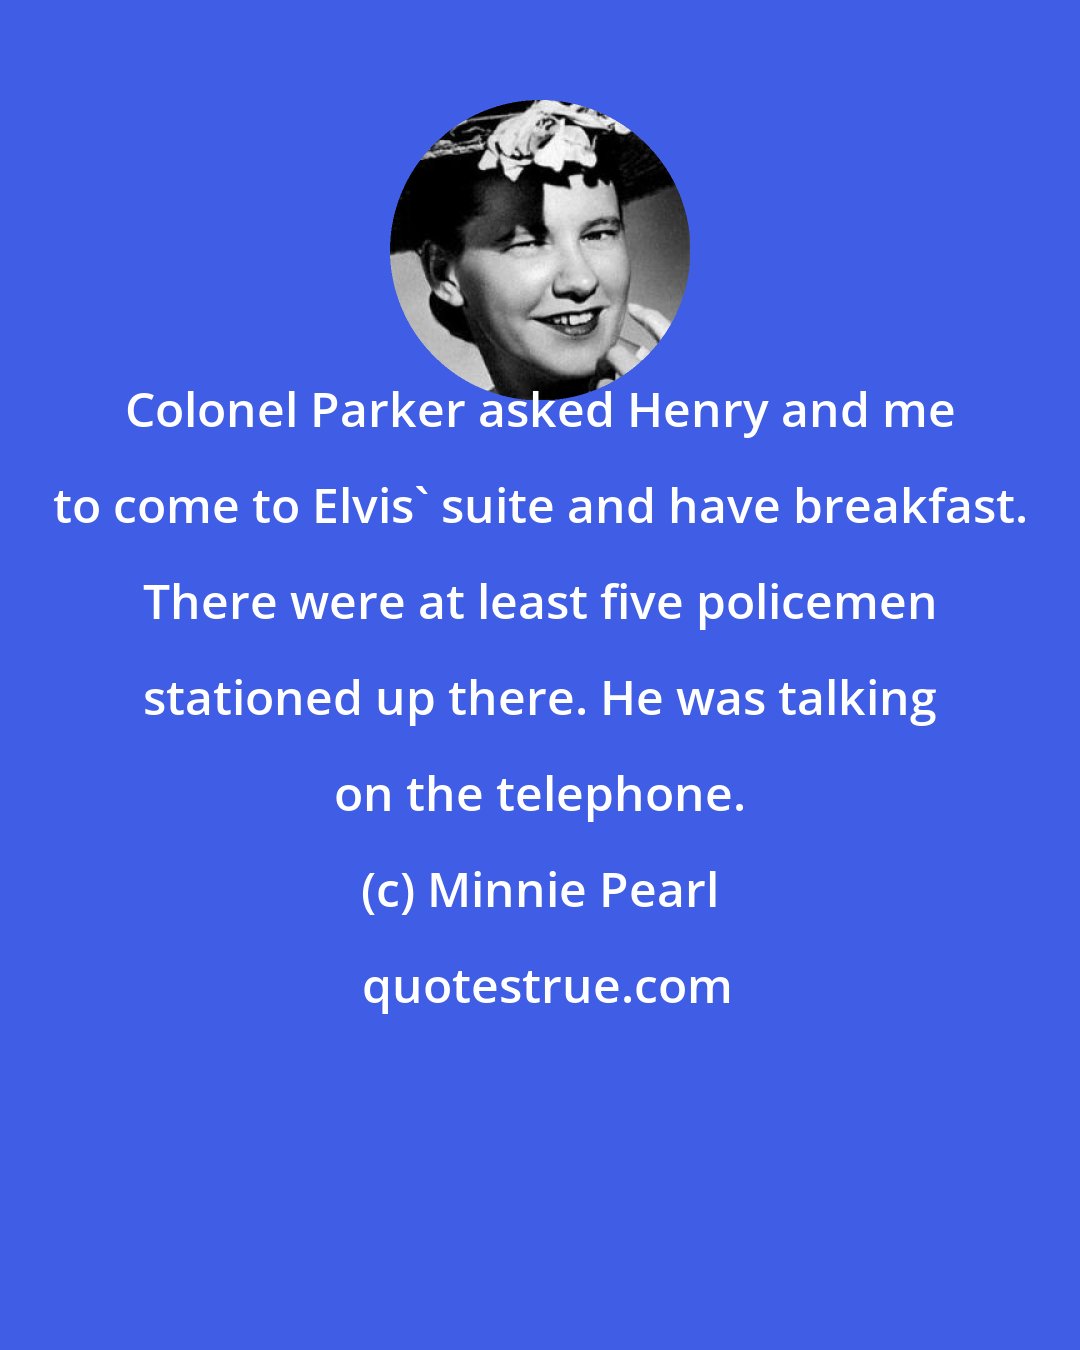 Minnie Pearl: Colonel Parker asked Henry and me to come to Elvis' suite and have breakfast. There were at least five policemen stationed up there. He was talking on the telephone.